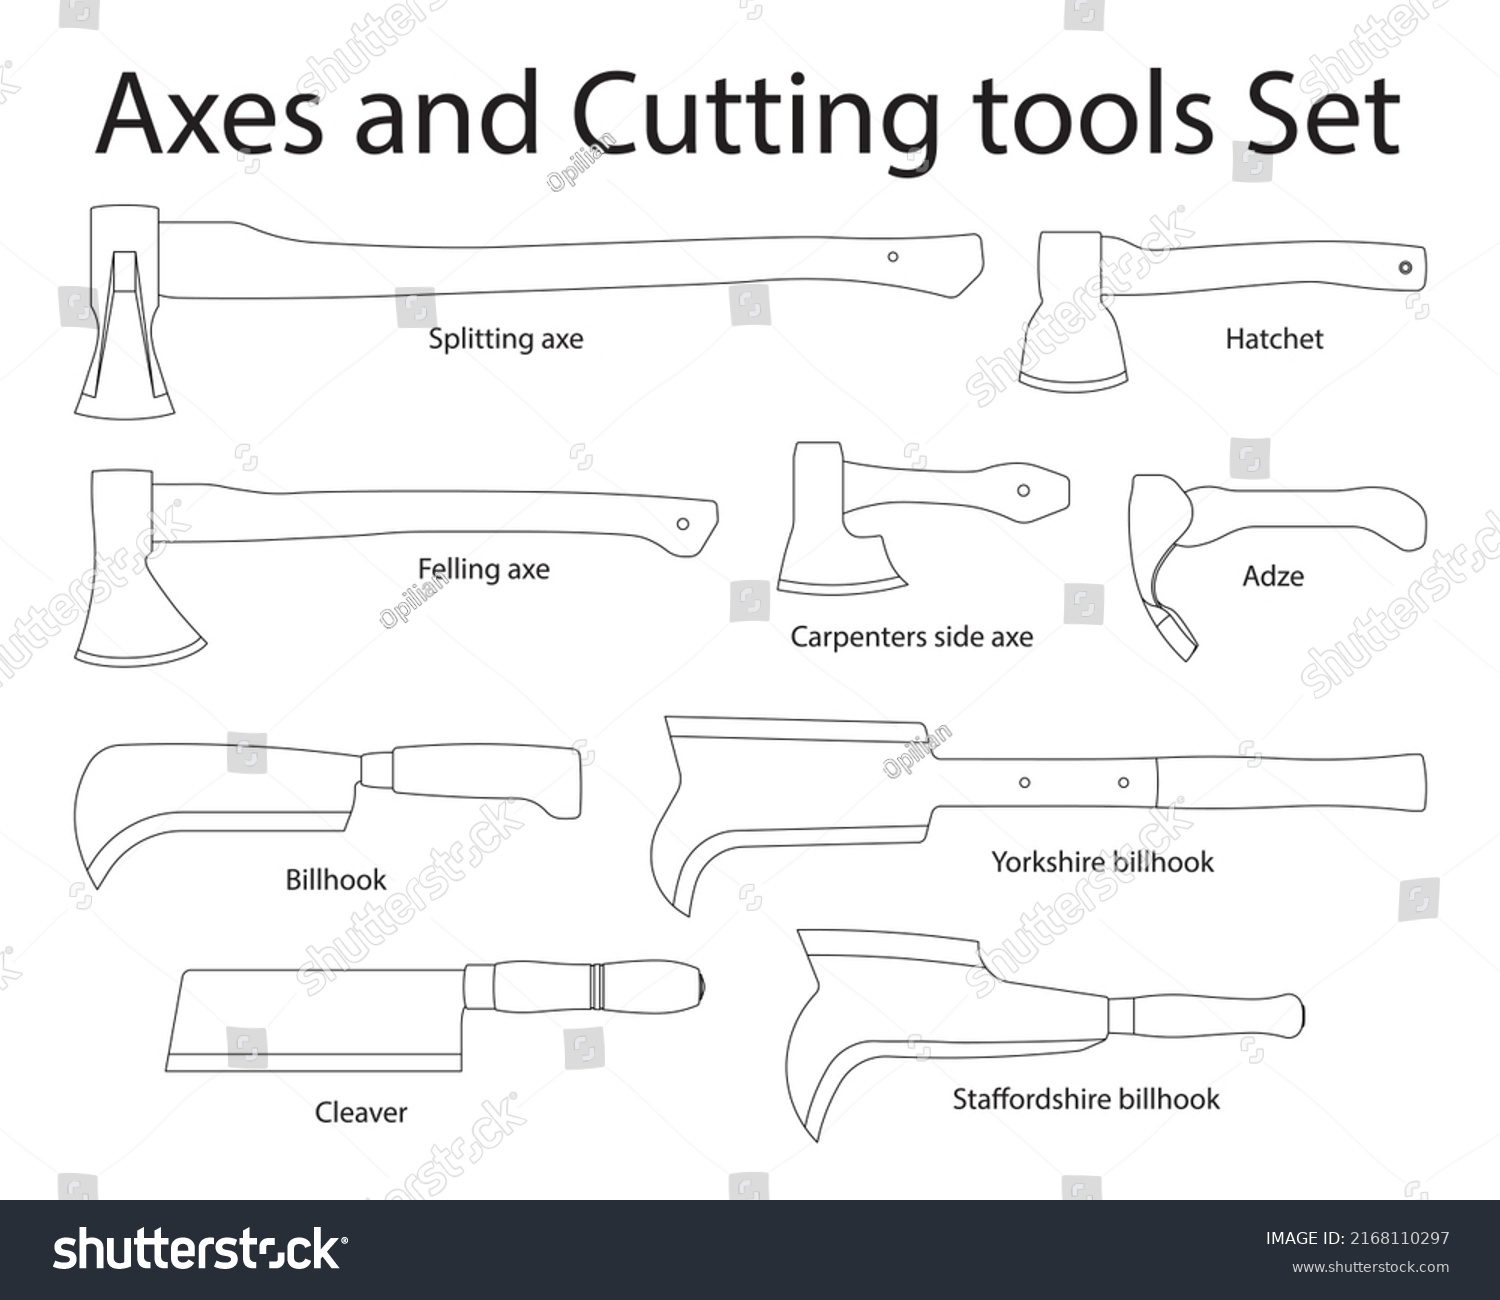 SVG of Different types of Axes and Cutting tools set isolated outline vectors on white background. Consists of Axe Adze Hatchet Billhook and Cleaver. Used for carpenter woodworking forest log. svg